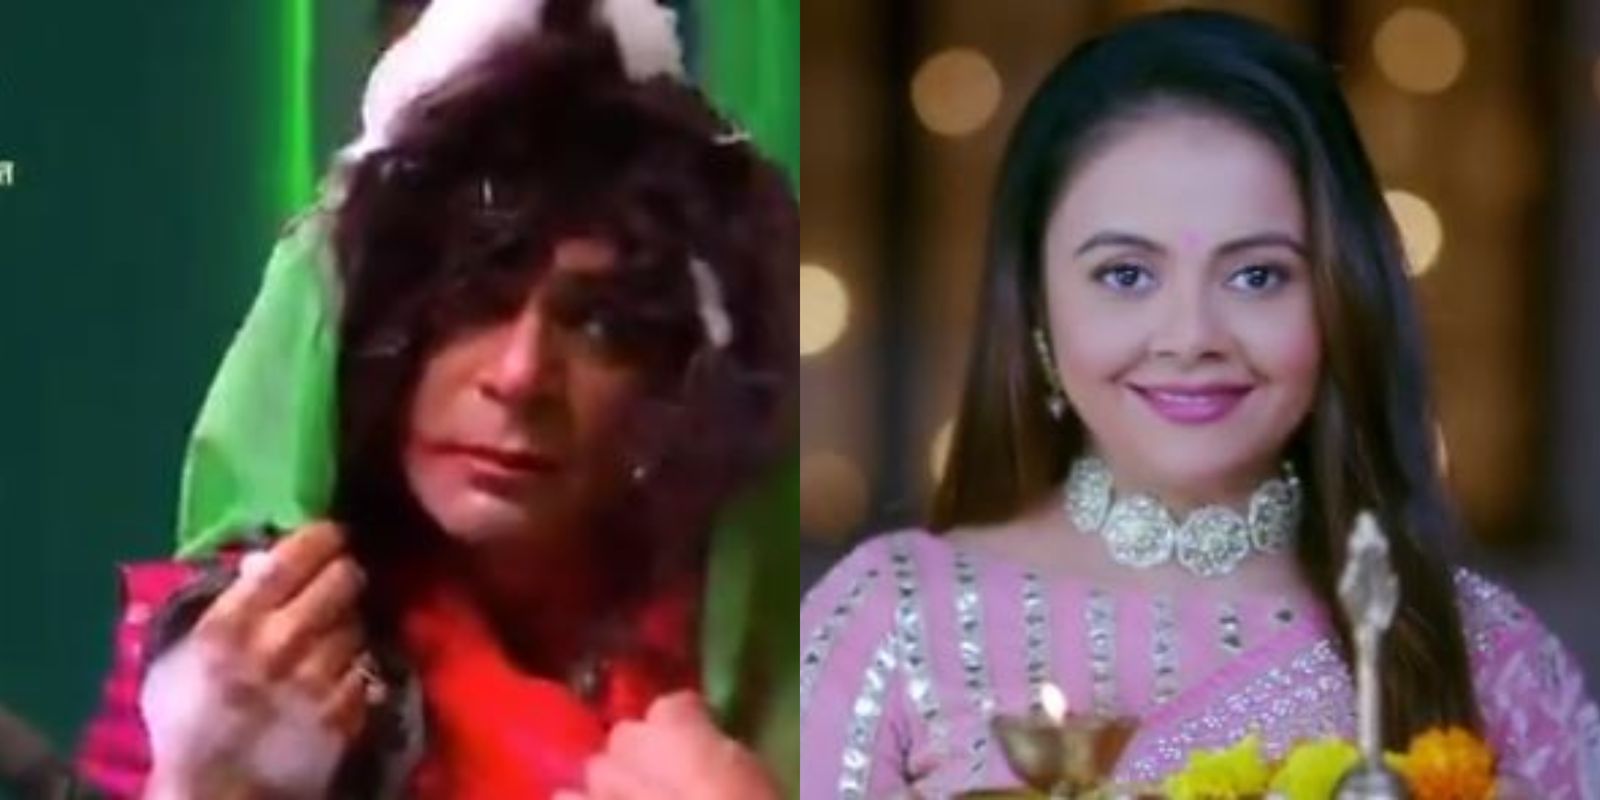 Sunil Grover Throws Himself In A Washing Machine As 'Topi' Bahu, Devoleena Bhattacharjee Is Taking Notes For SNS 2 